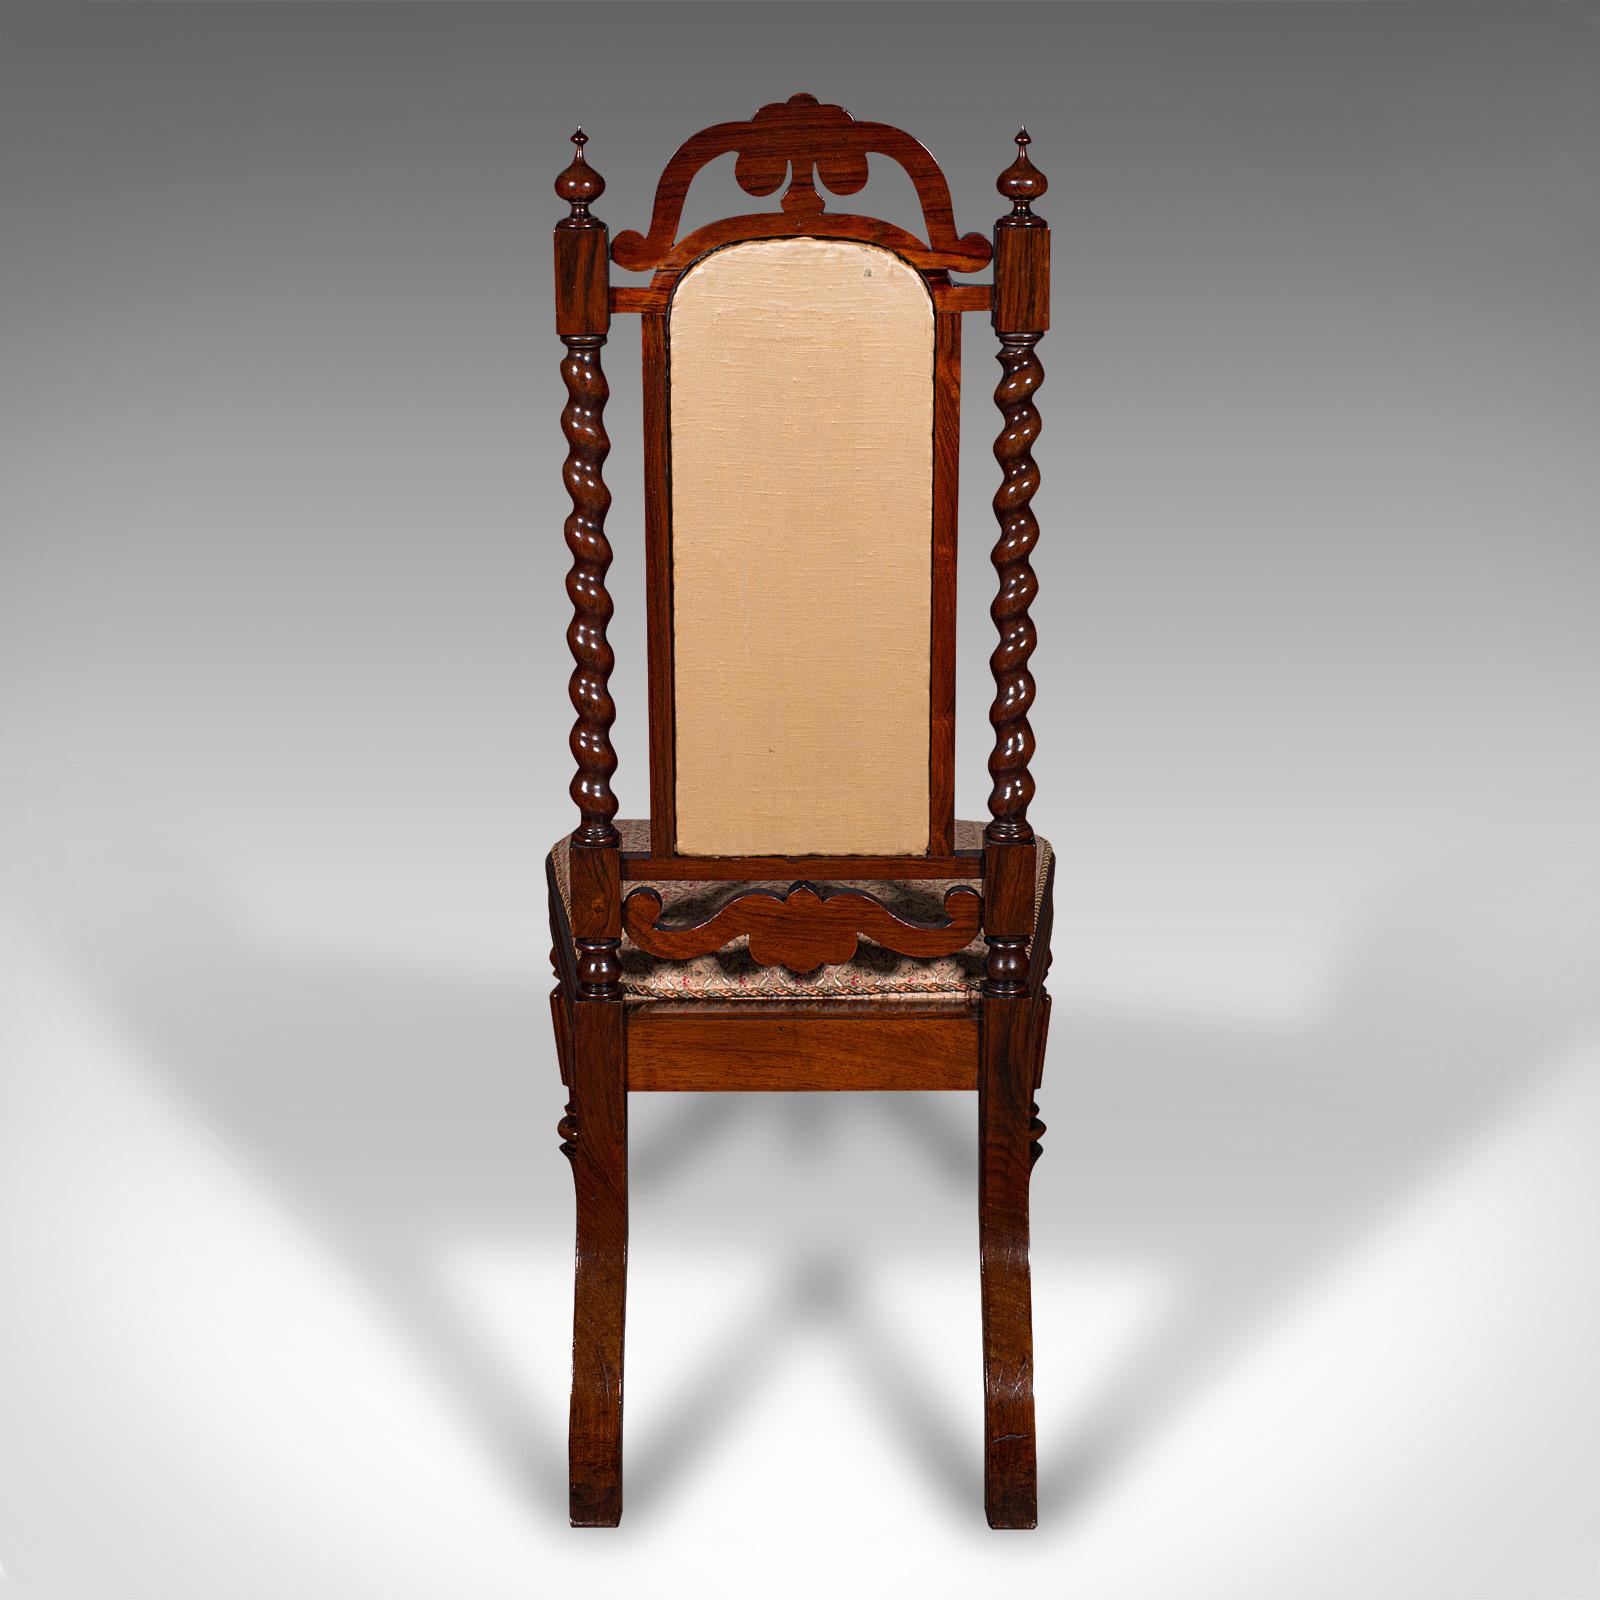 19th Century Antique Morning Room Chair, English, Silk Cotton, Side Seat, William IV, C.1835 For Sale